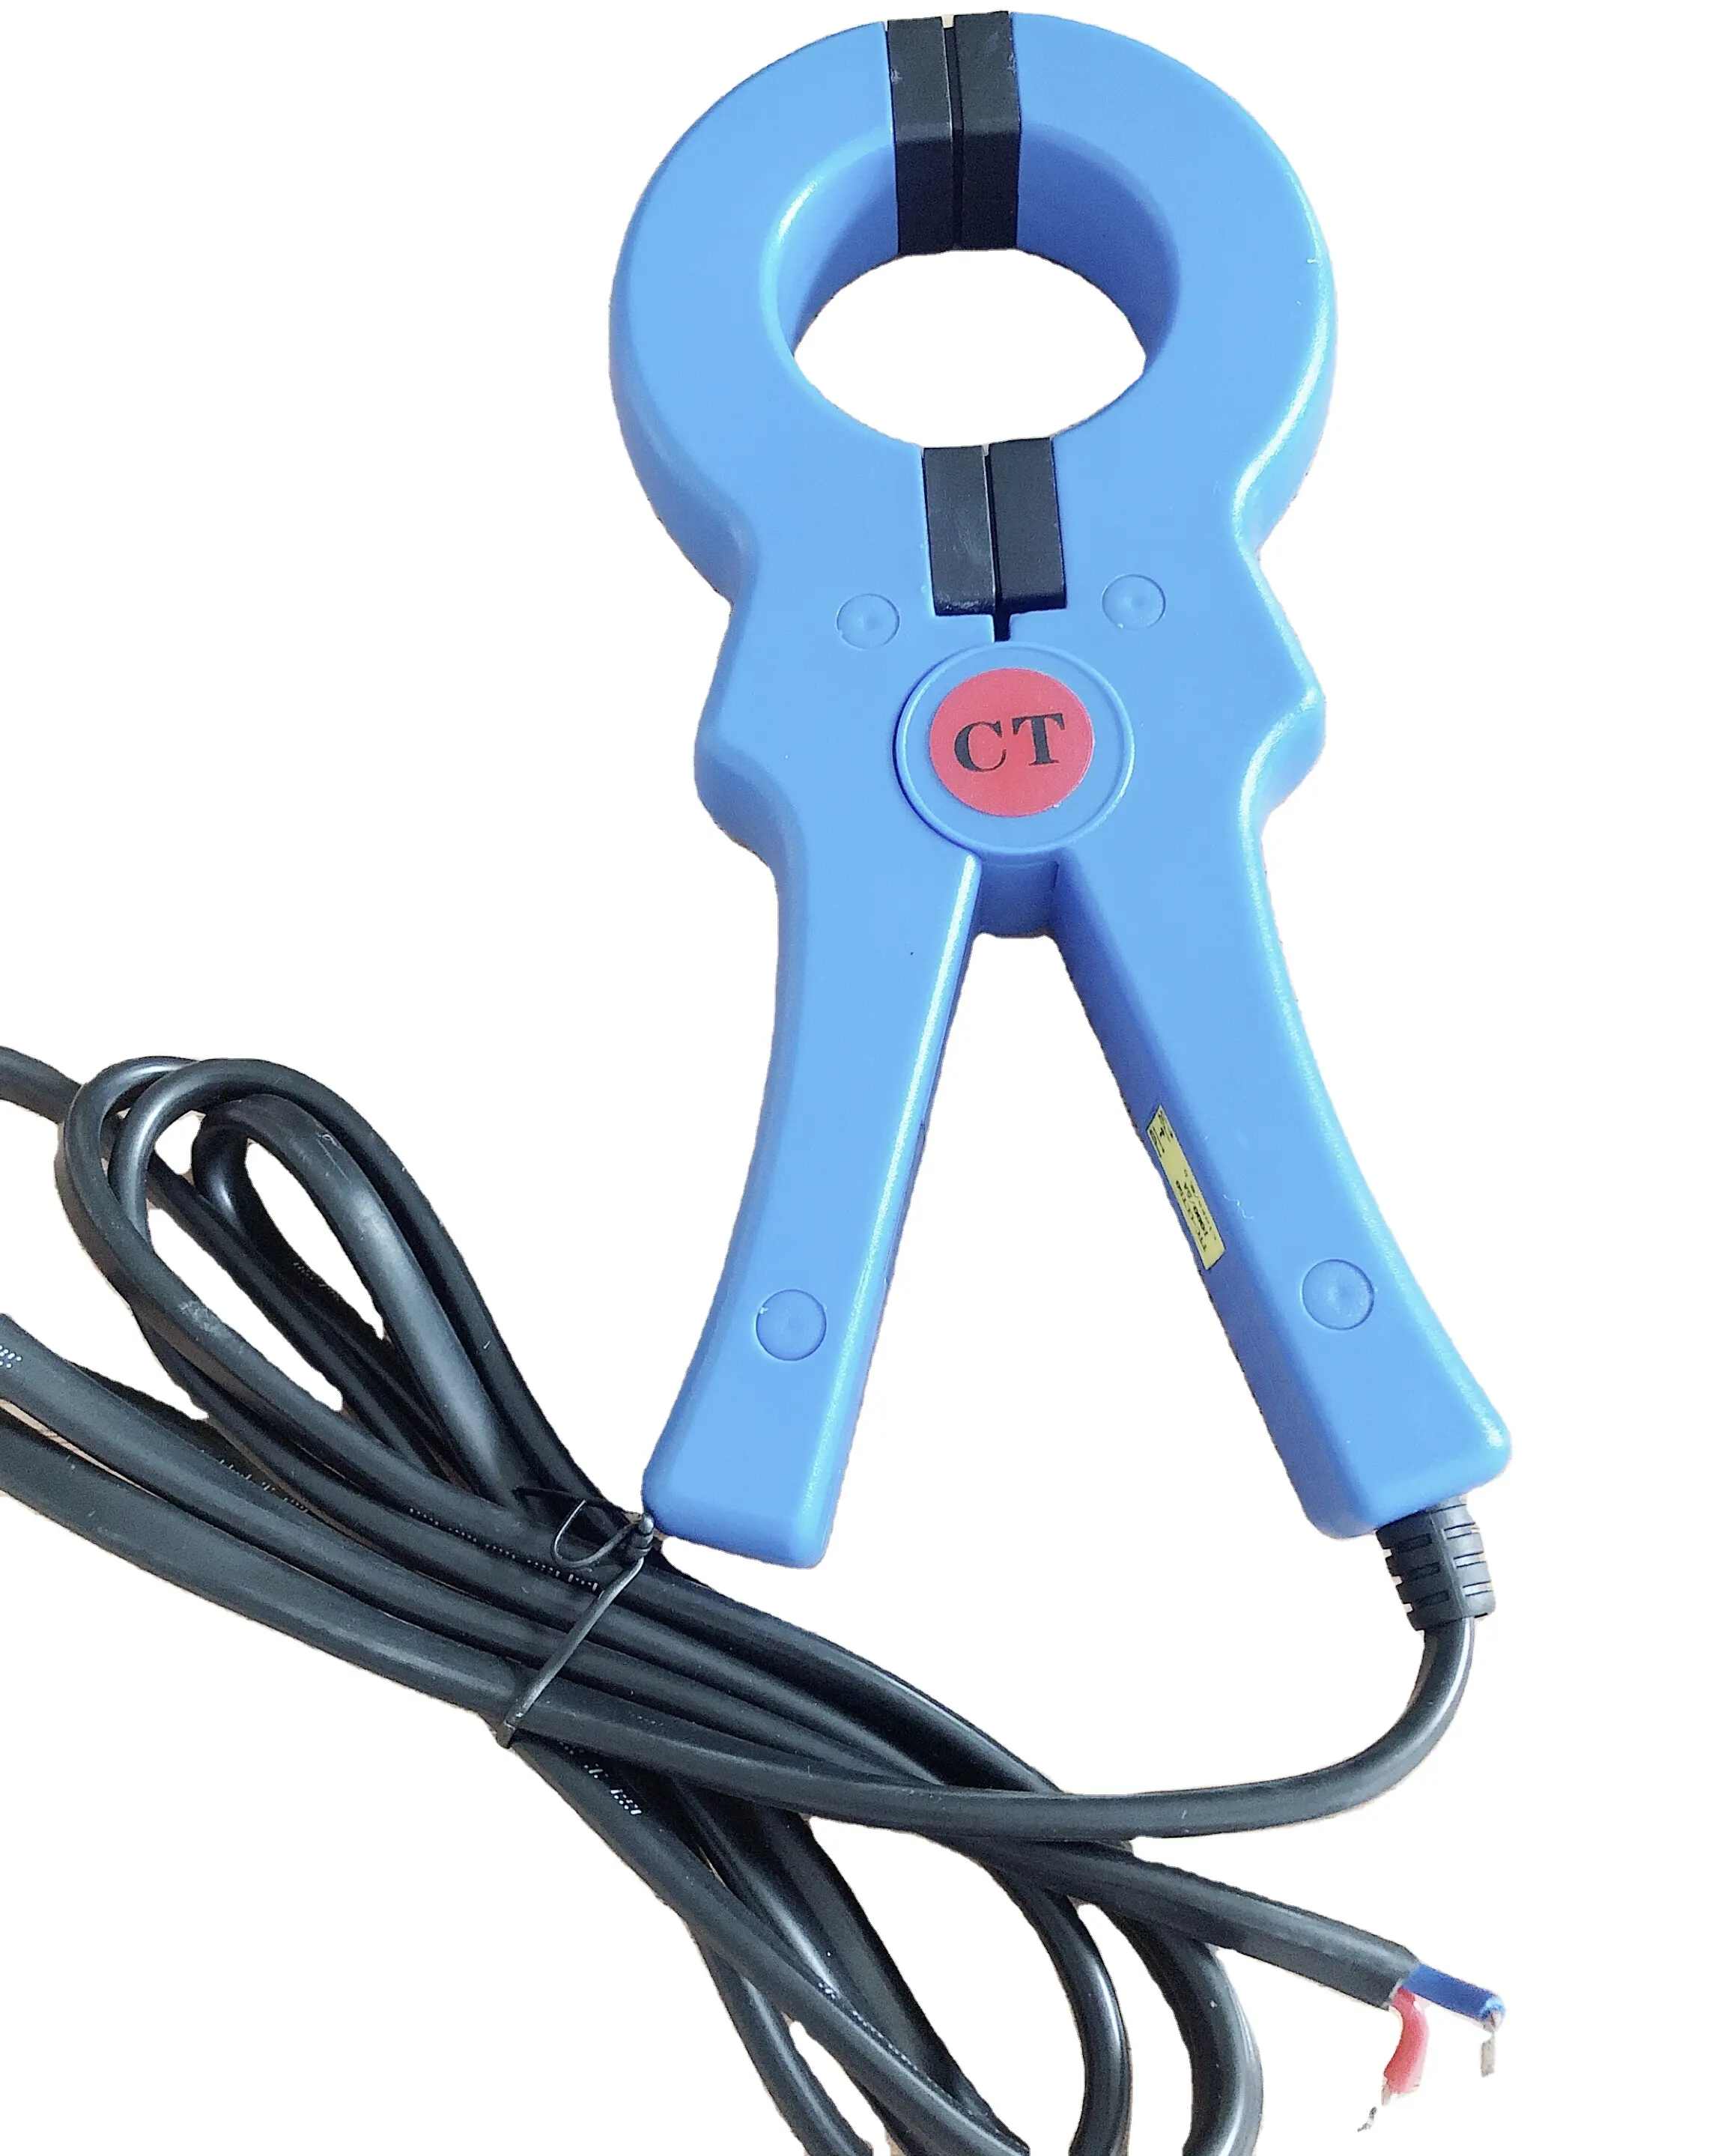 clamp current probe 1000a/5a-split core clamp on current sensor